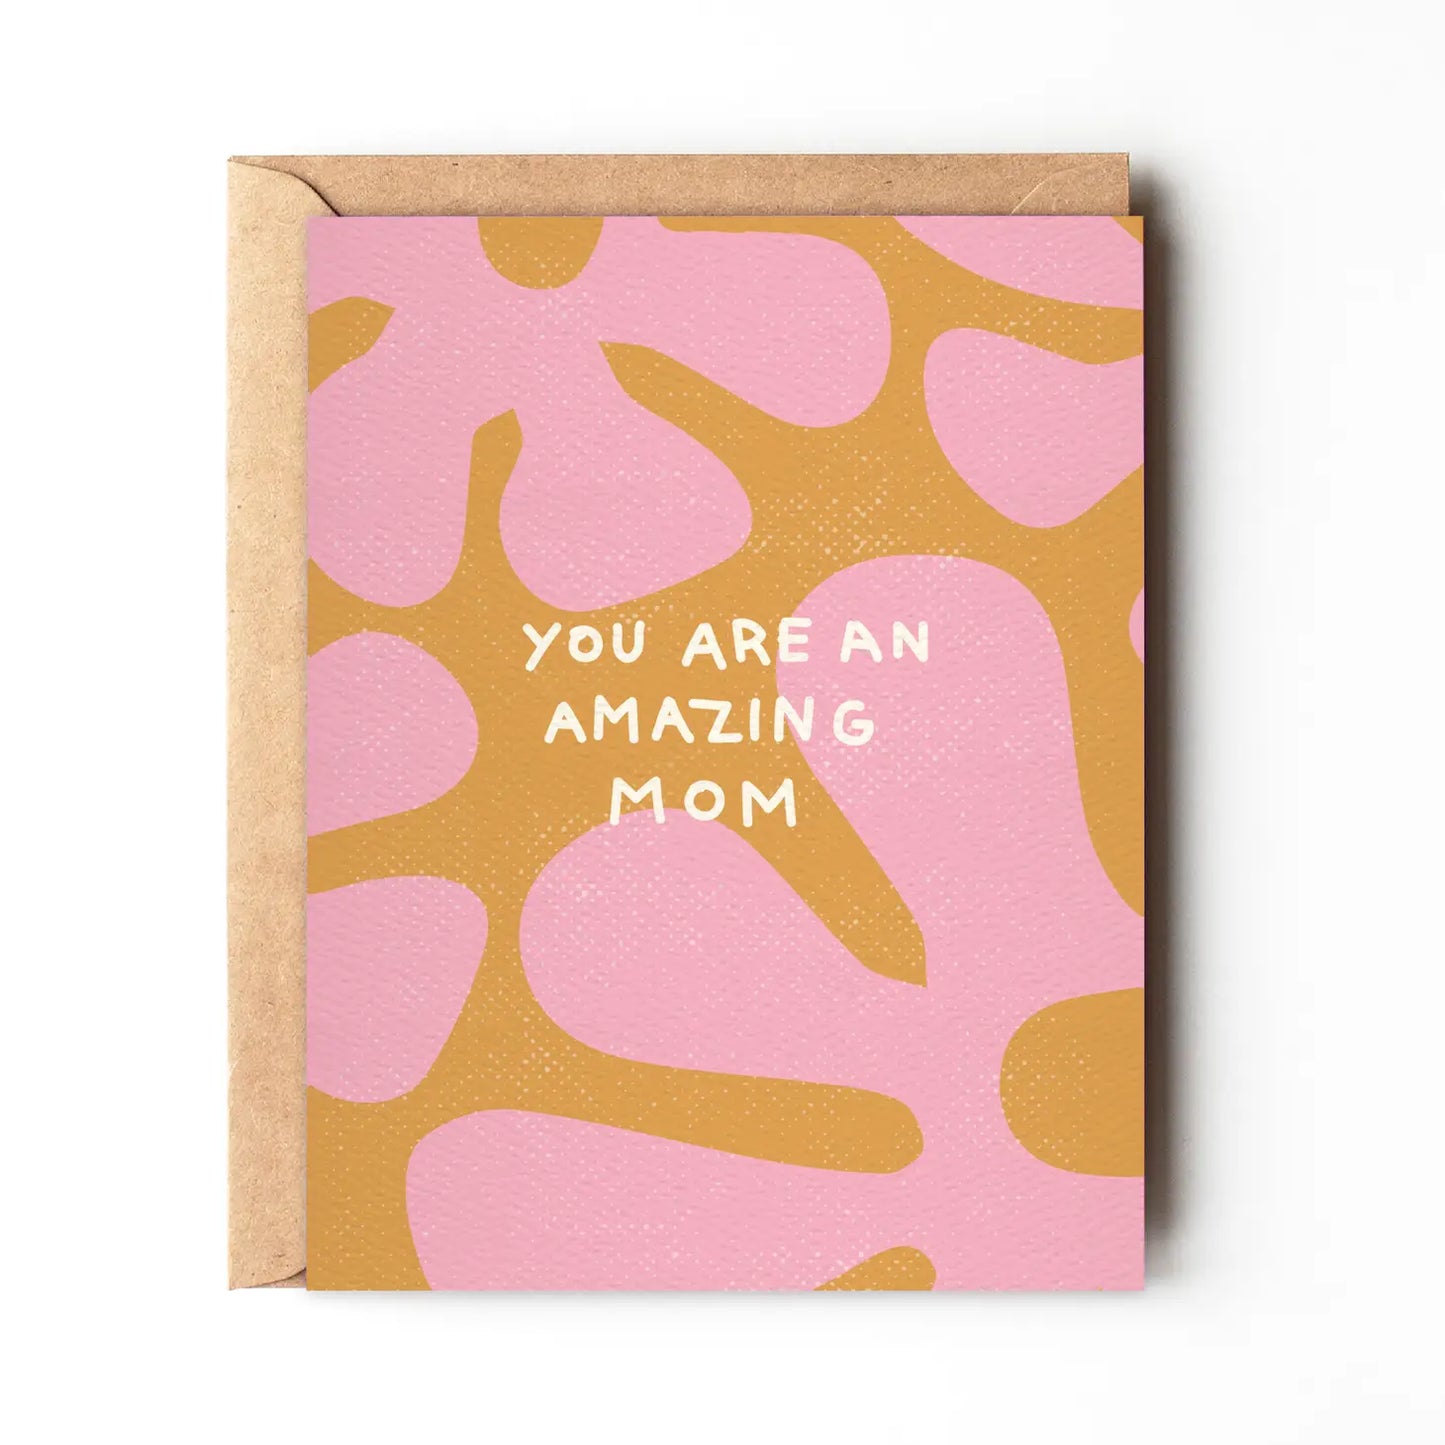 You’re an Amazing Mom Greeting Card